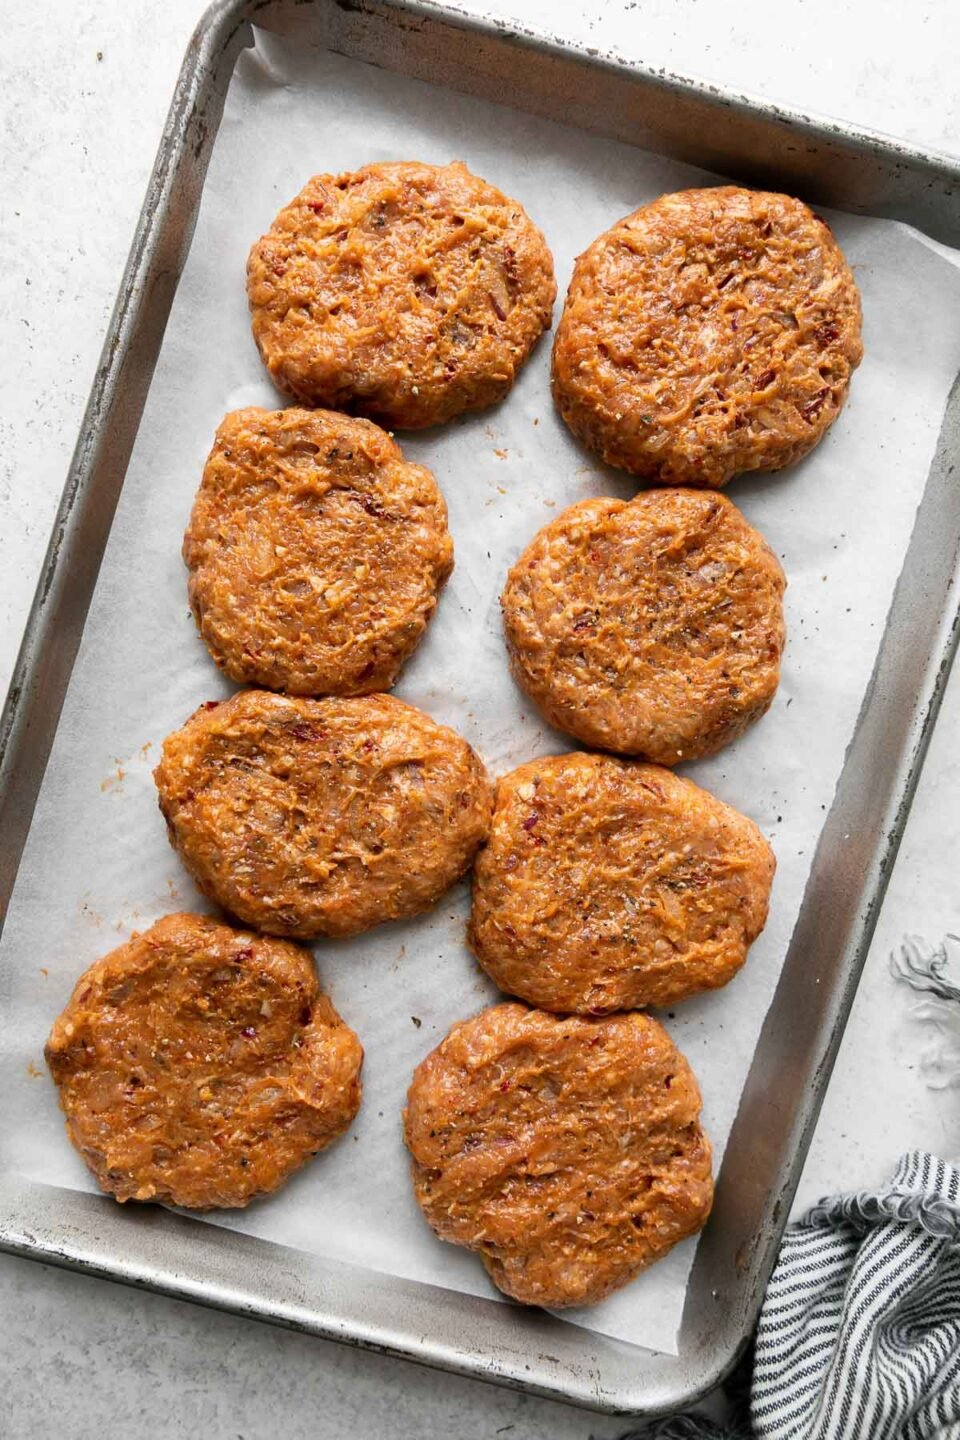 Six formed chipotle turkey burger patties arranged on a parchment paper lined baking sheet. The baking sheet sits atop a creamy white textured surface with a blue and white striped linen napkin resting alongside.